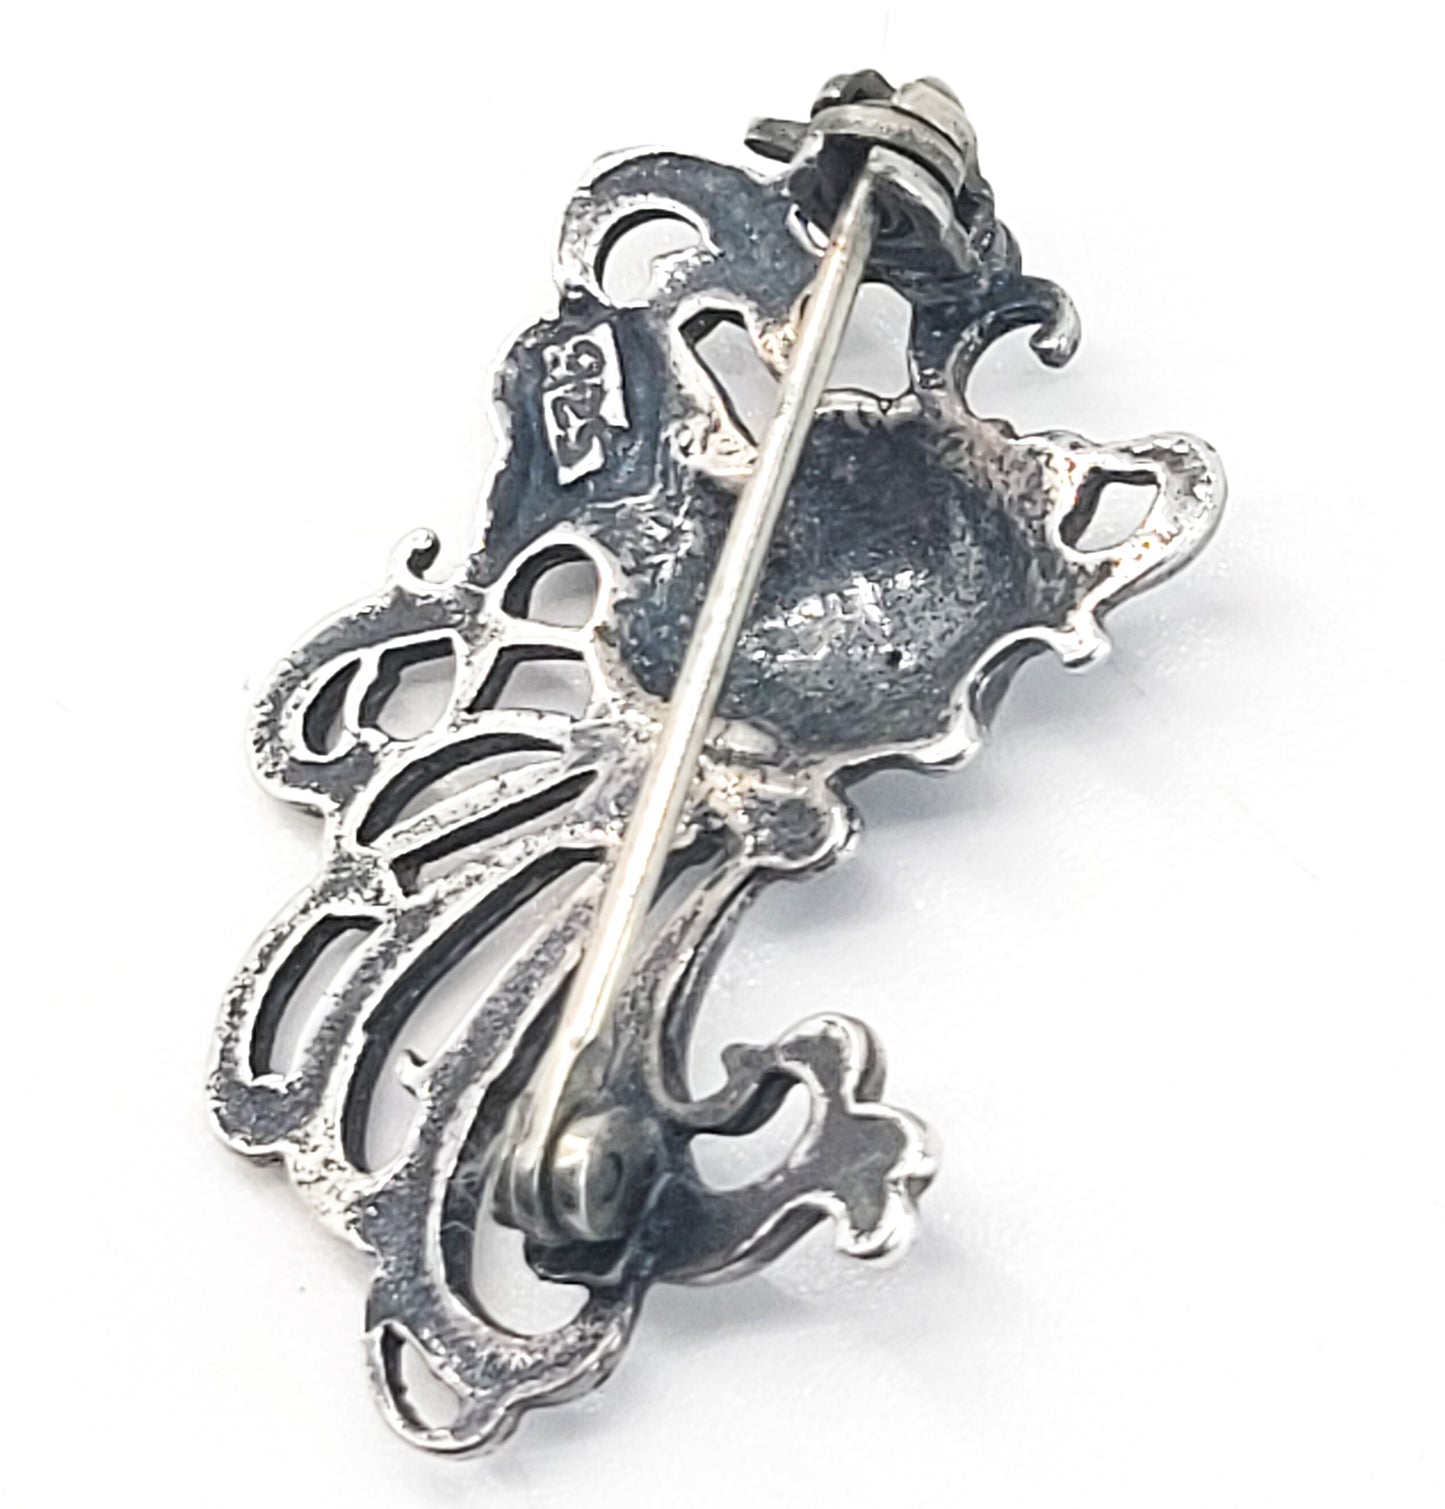 Art Nouveau Nymph sweeping cartouche woman sterling silver vintage brooch